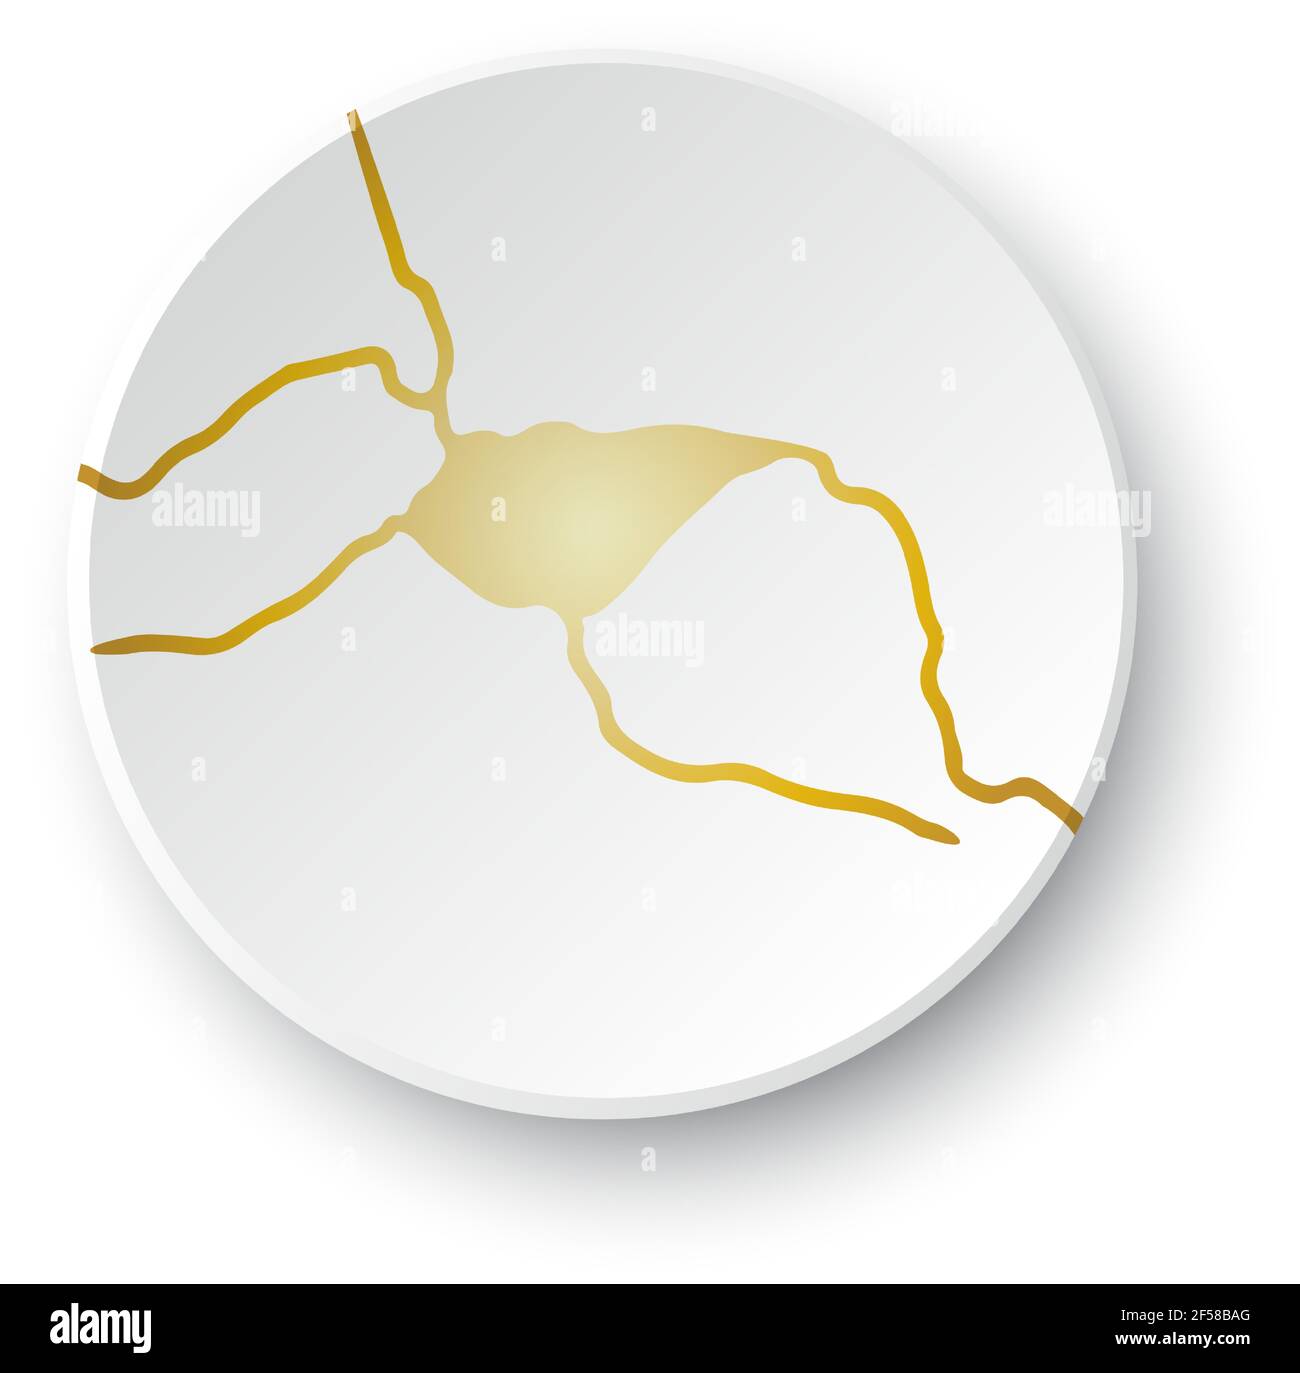 Gold Kintsugi crack. Broken and crack effect, craquelure and damaged texture. Vector illustrations can be used for kintsugi decorations, wall arts Stock Vector